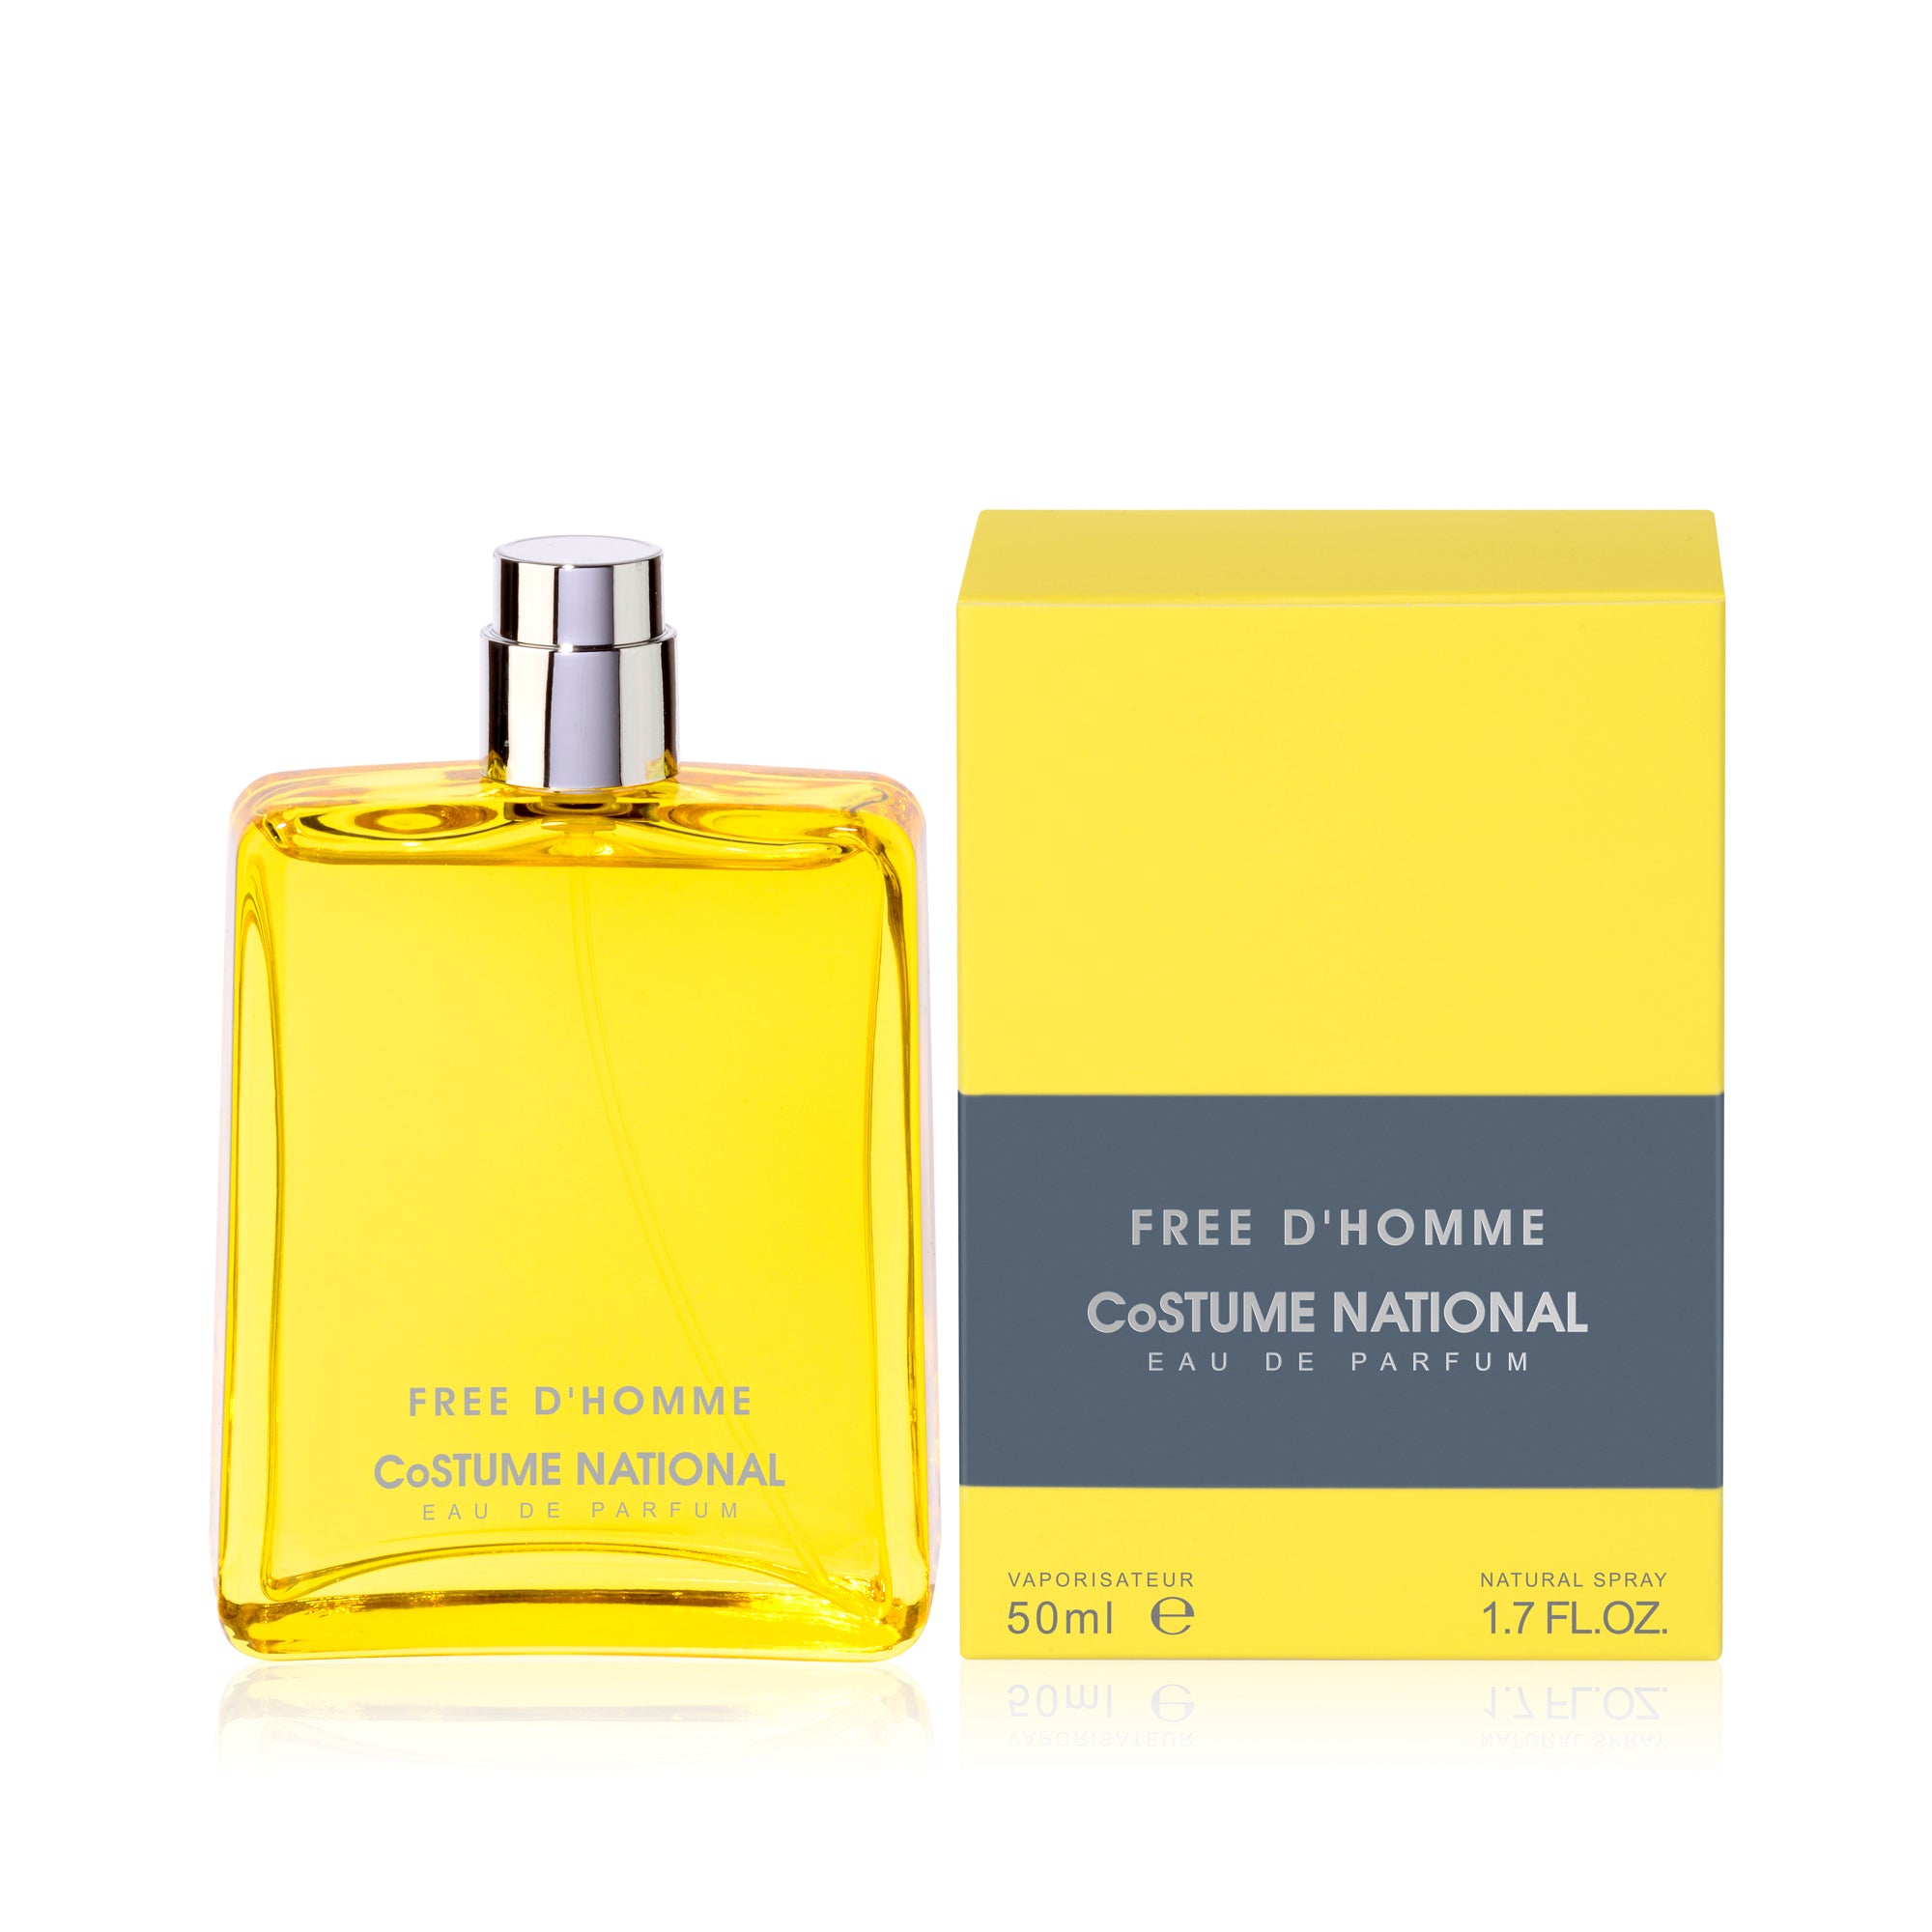 Costume National – Free d'Homme